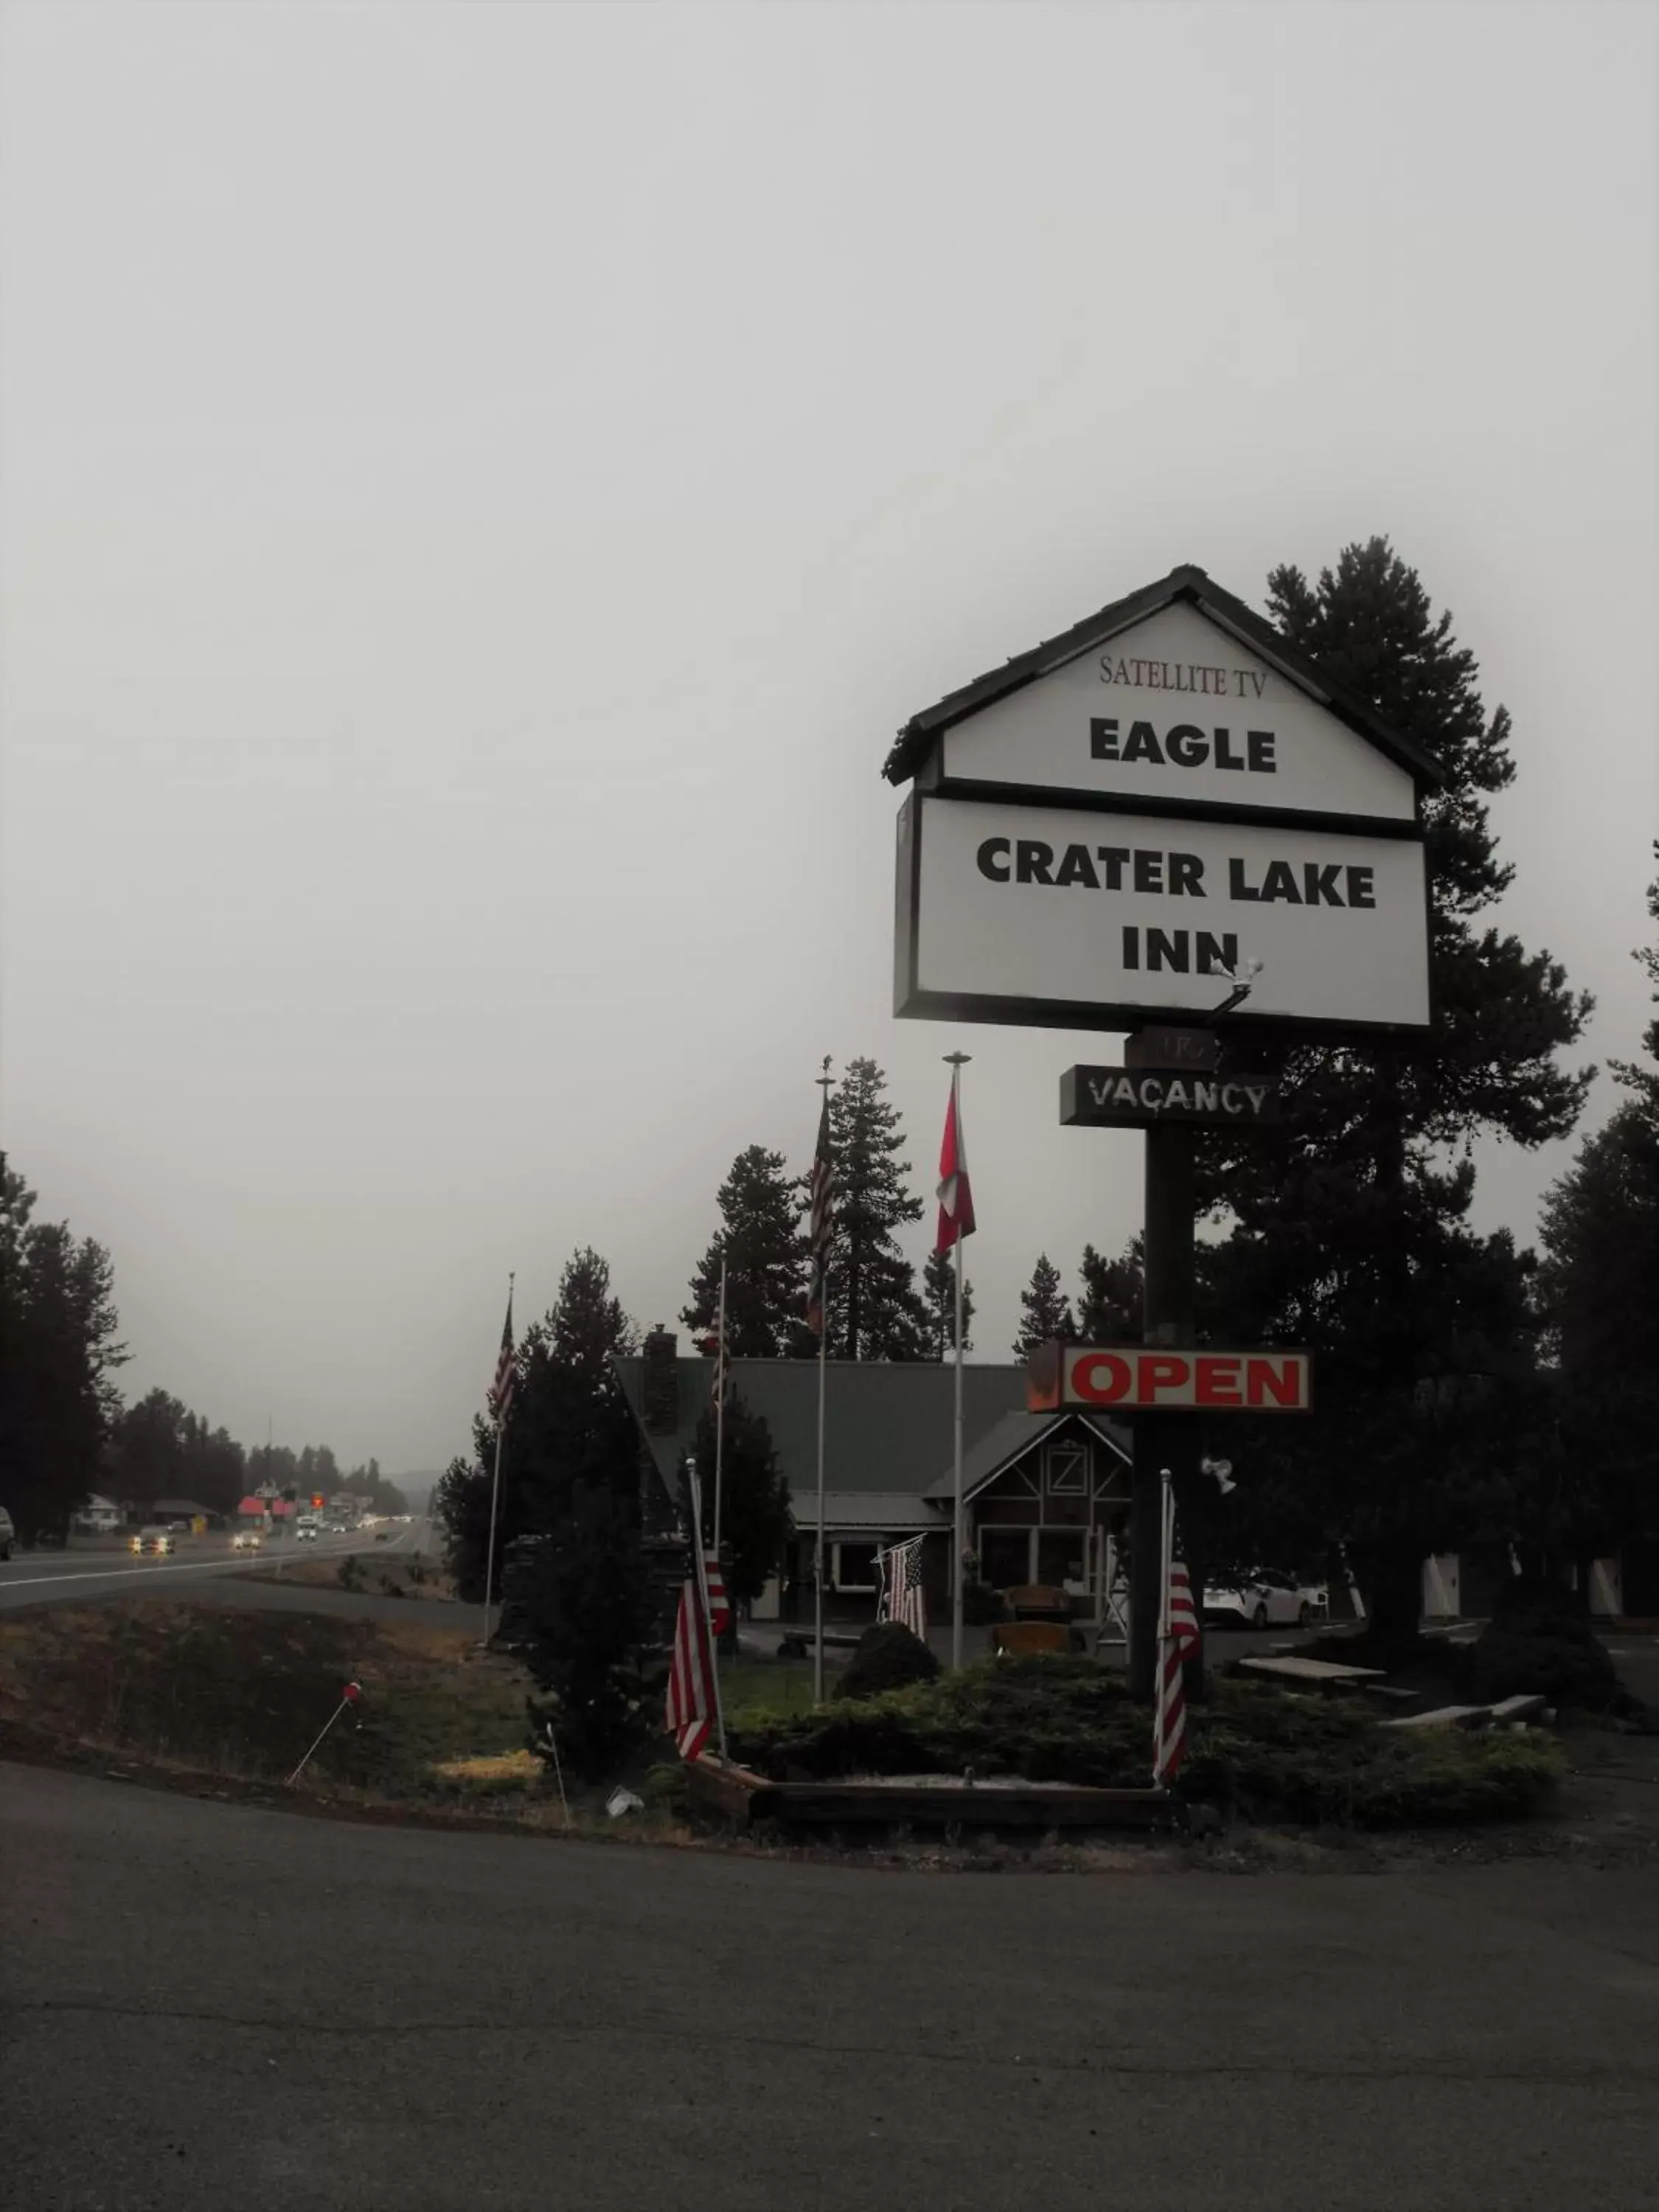 Property Logo/Sign in Eagle Crater Lake Inn